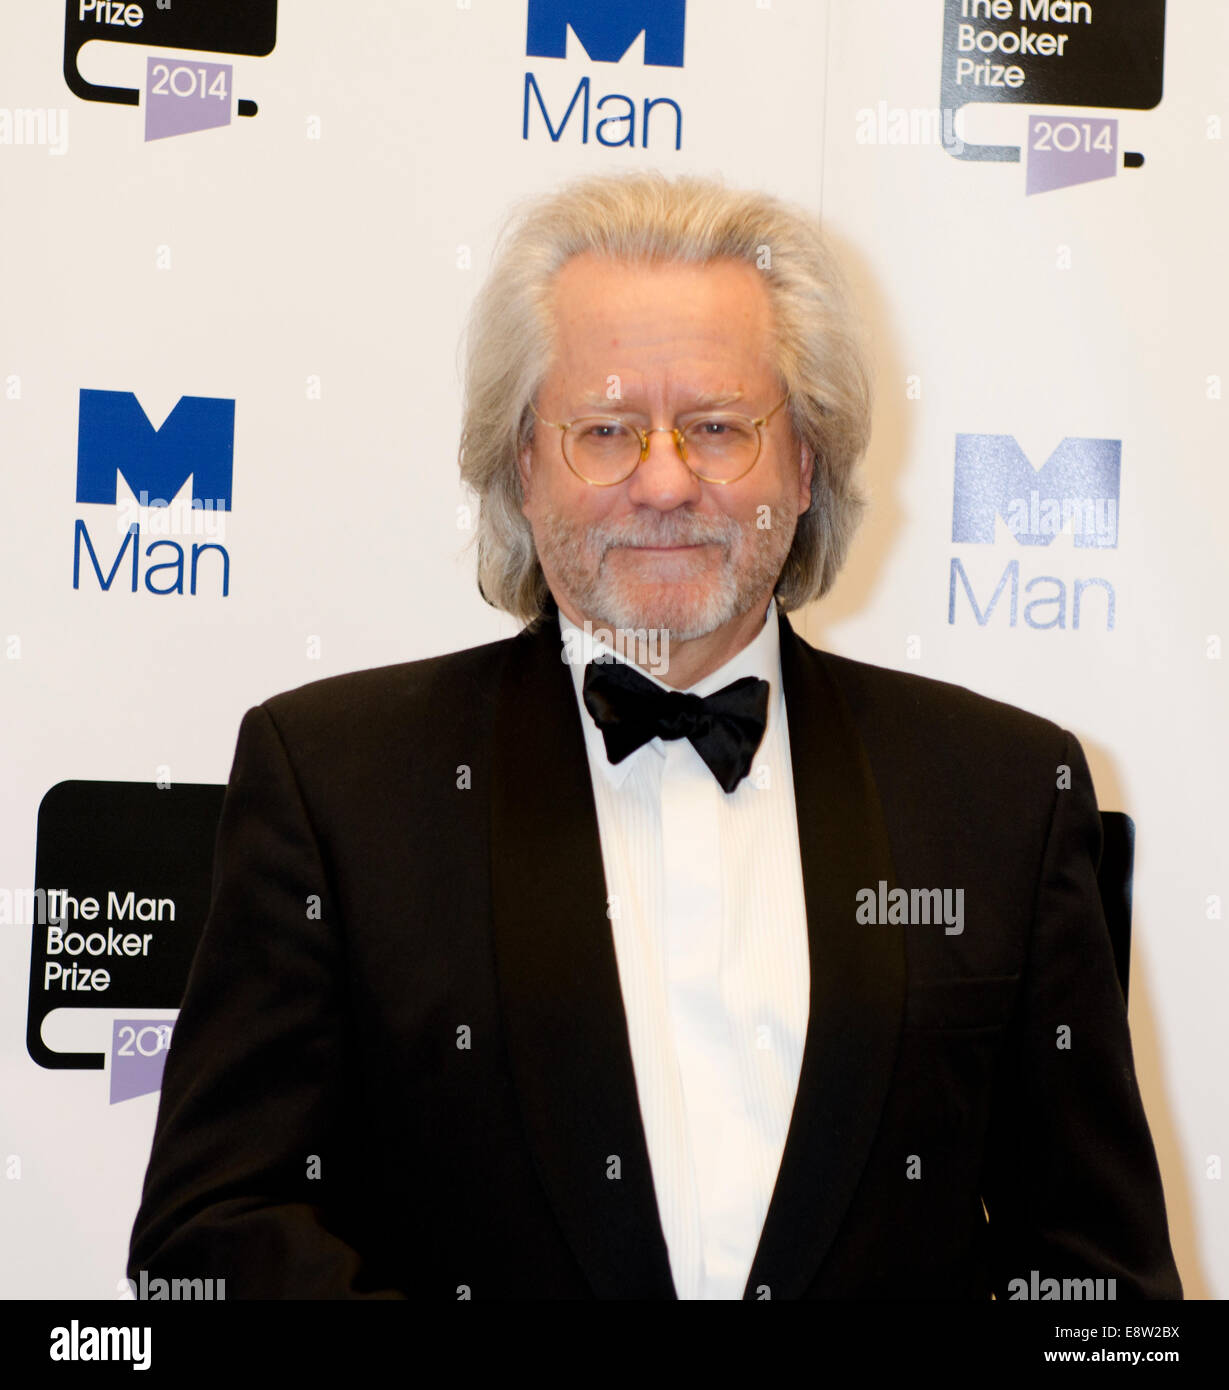 AC Grayling chair of Man Booker Prize judges at photo call © Prixnews/Alamy Live News London, UK. 14th October, 2014. Credit:  Prixnews/Alamy Live News Stock Photo